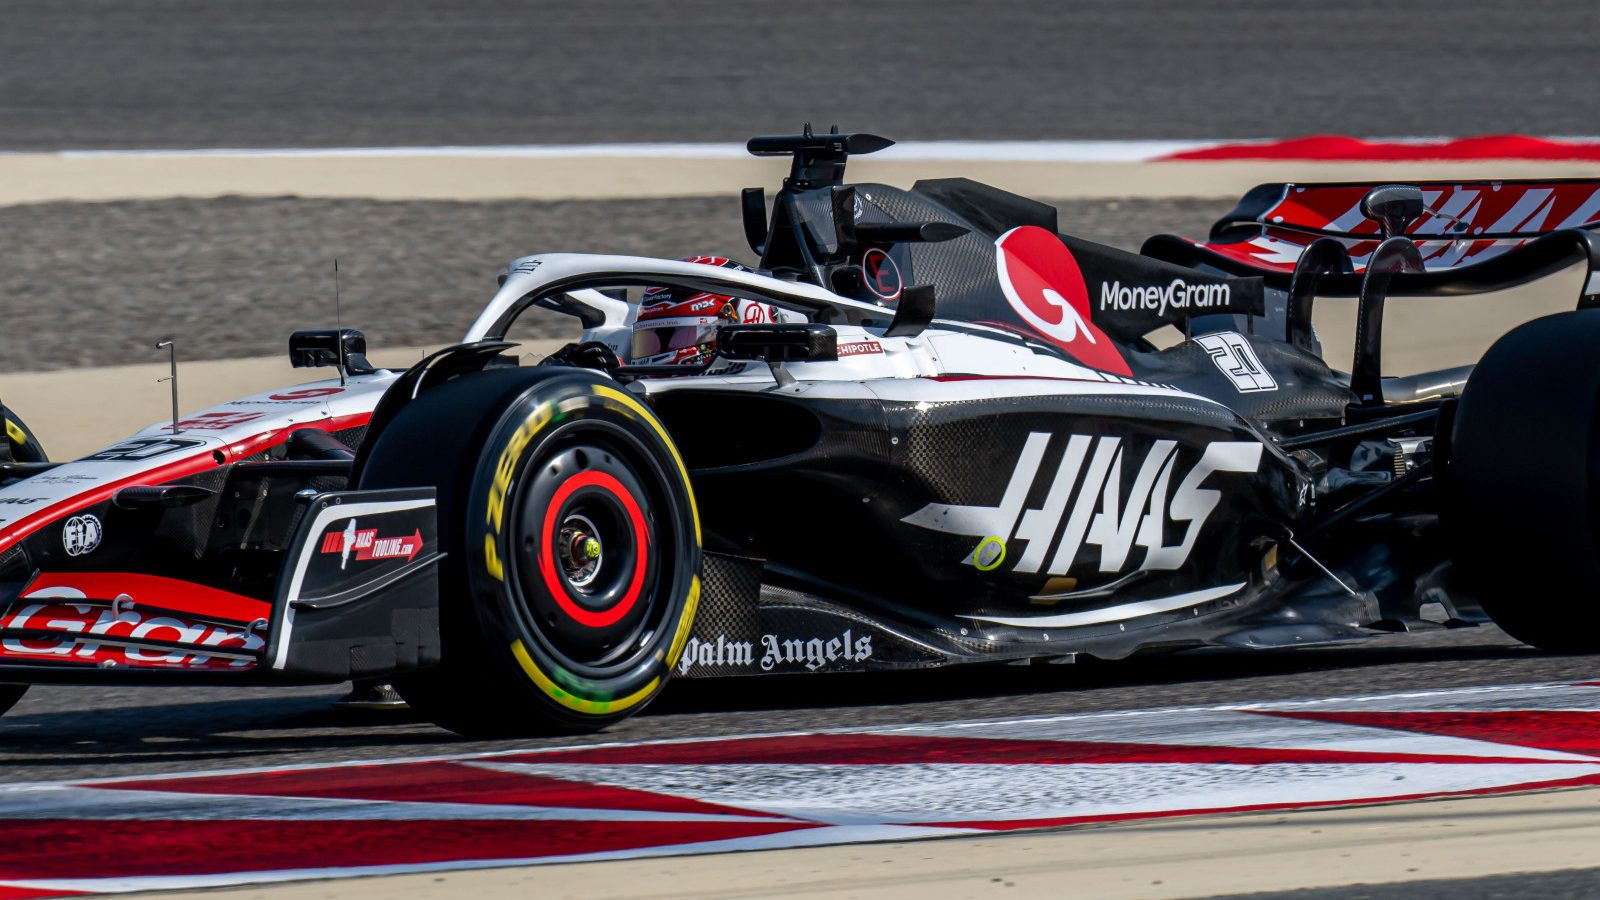 Kevin Magnussen in the Haas with the team logo showing. Bahrain March 2023